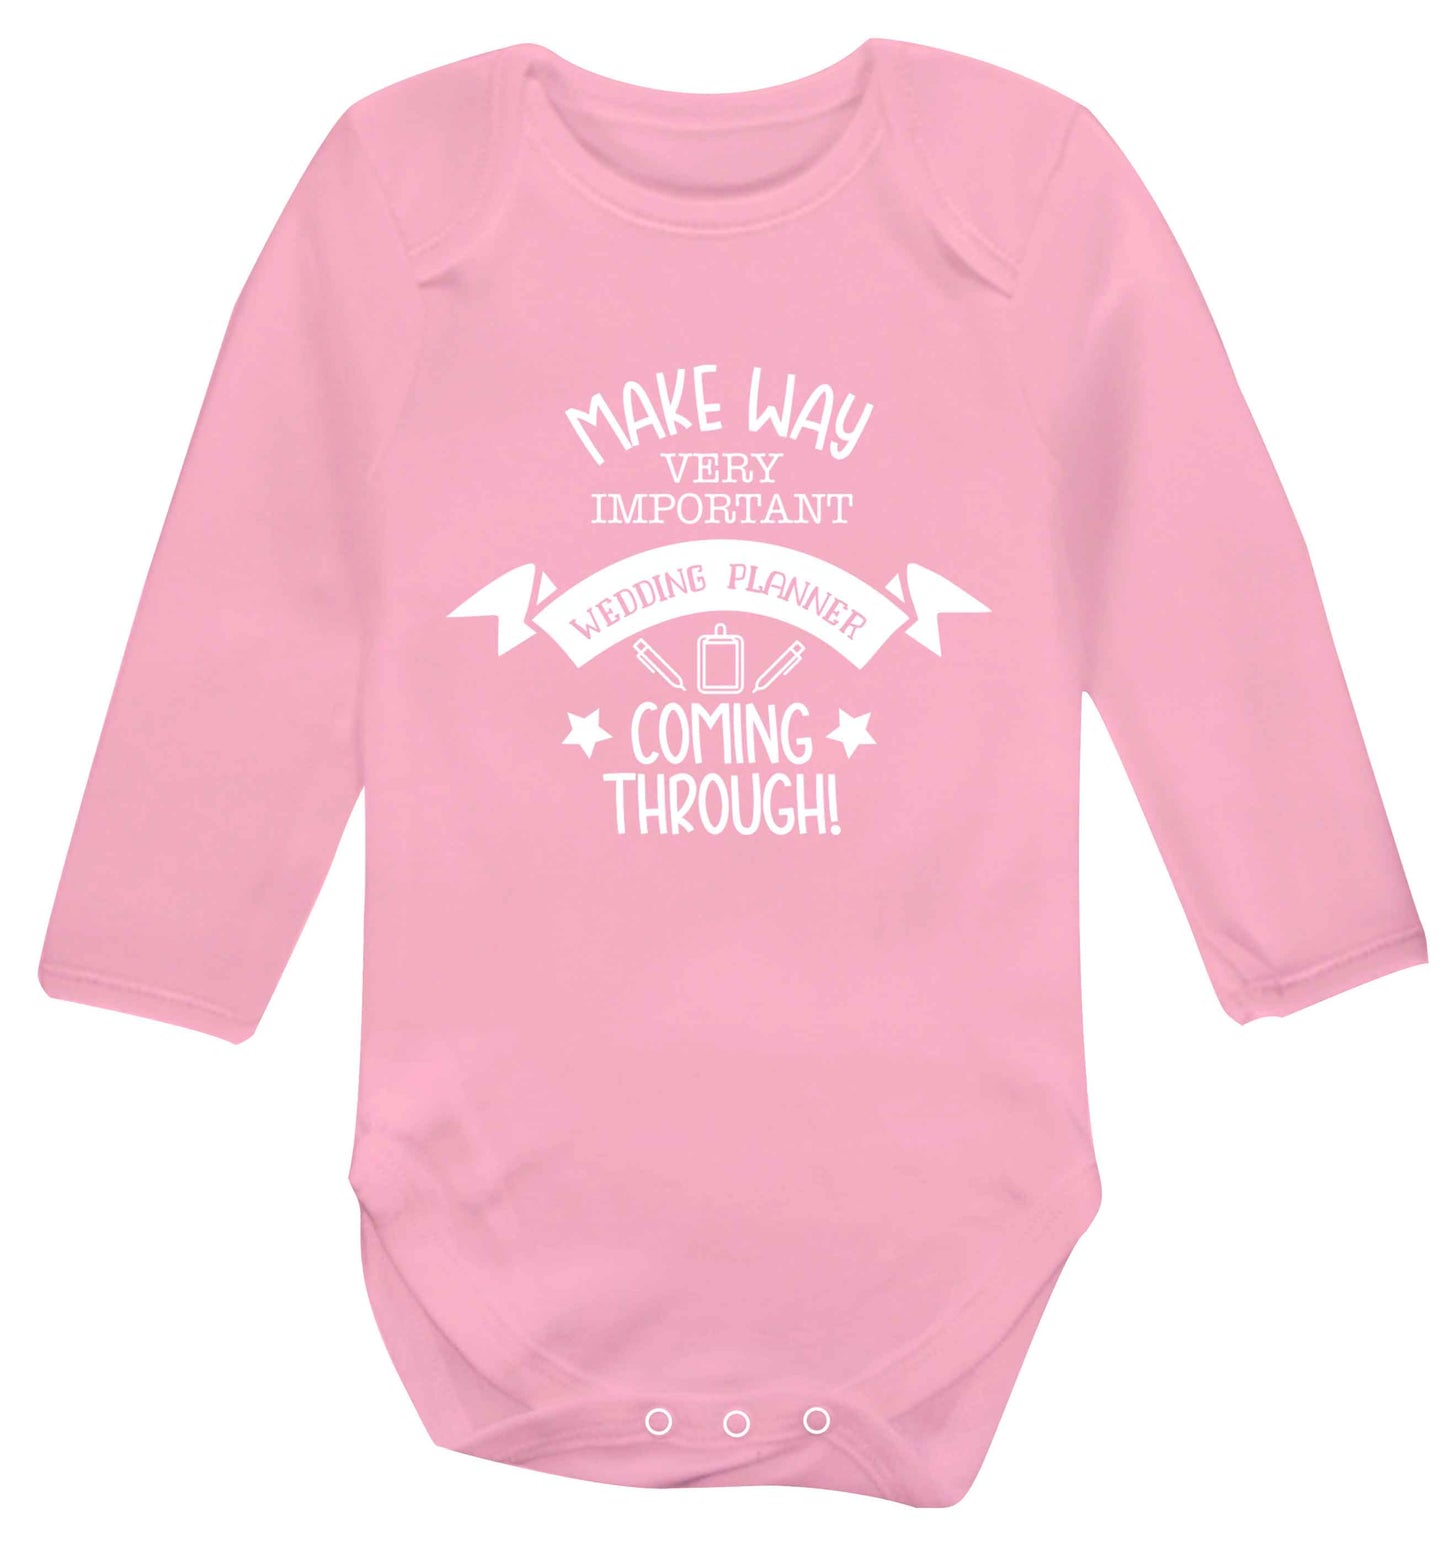 Make way very important wedding planner coming through Baby Vest long sleeved pale pink 6-12 months